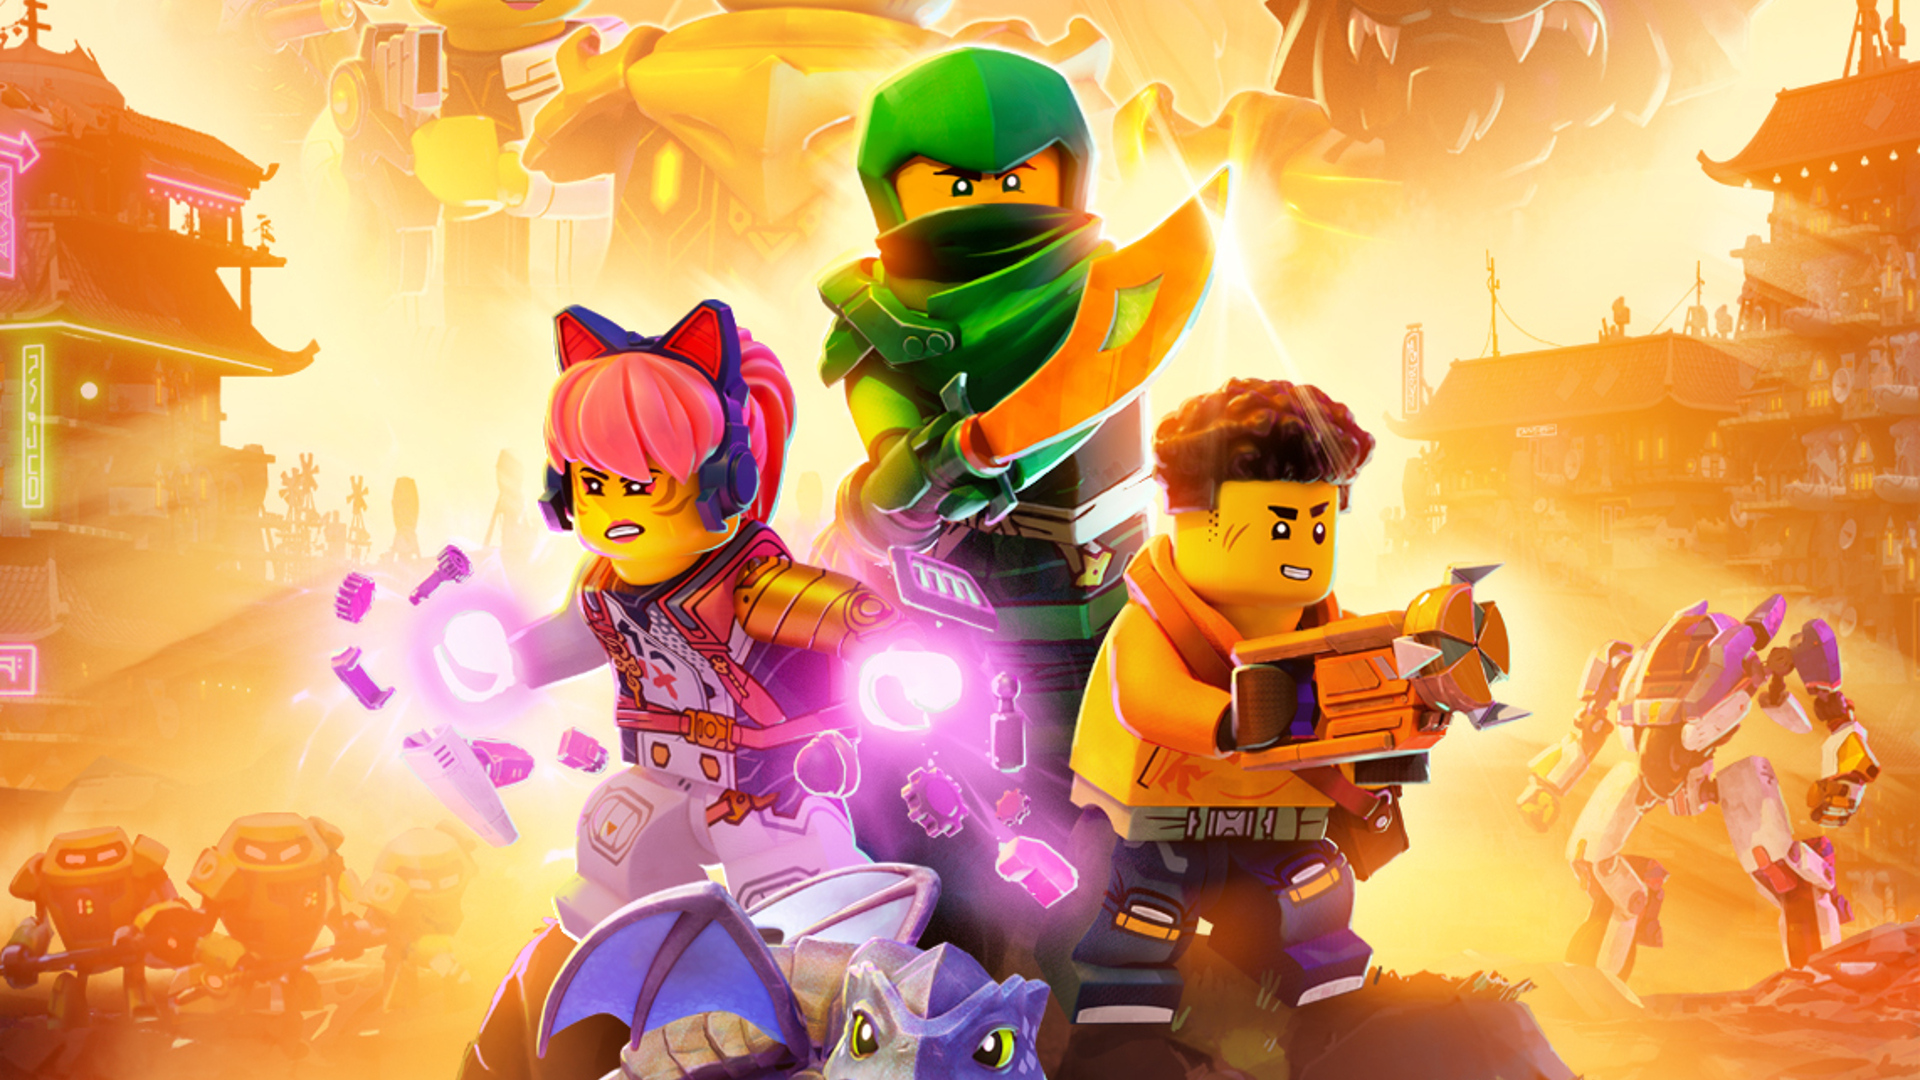 LEGO NINJAGO Returns With New Content, Event Happening At Malls